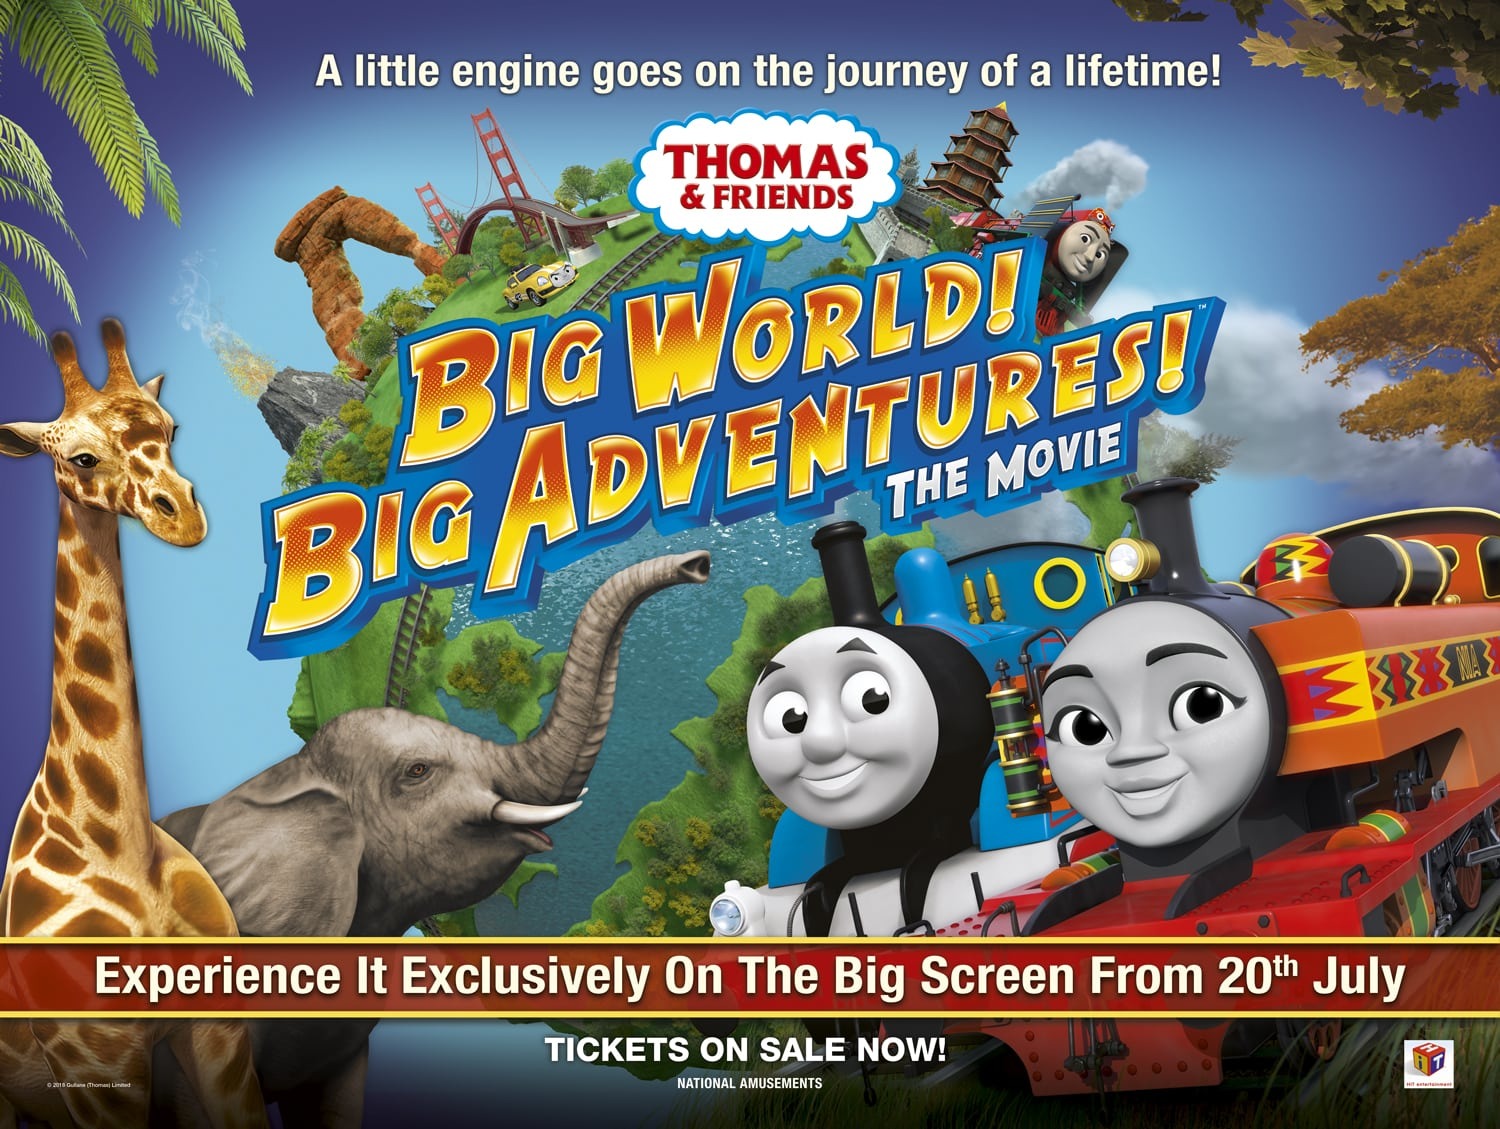 Extra Large Movie Poster Image for Thomas & Friends: Big World! Big Adventures! The Movie 